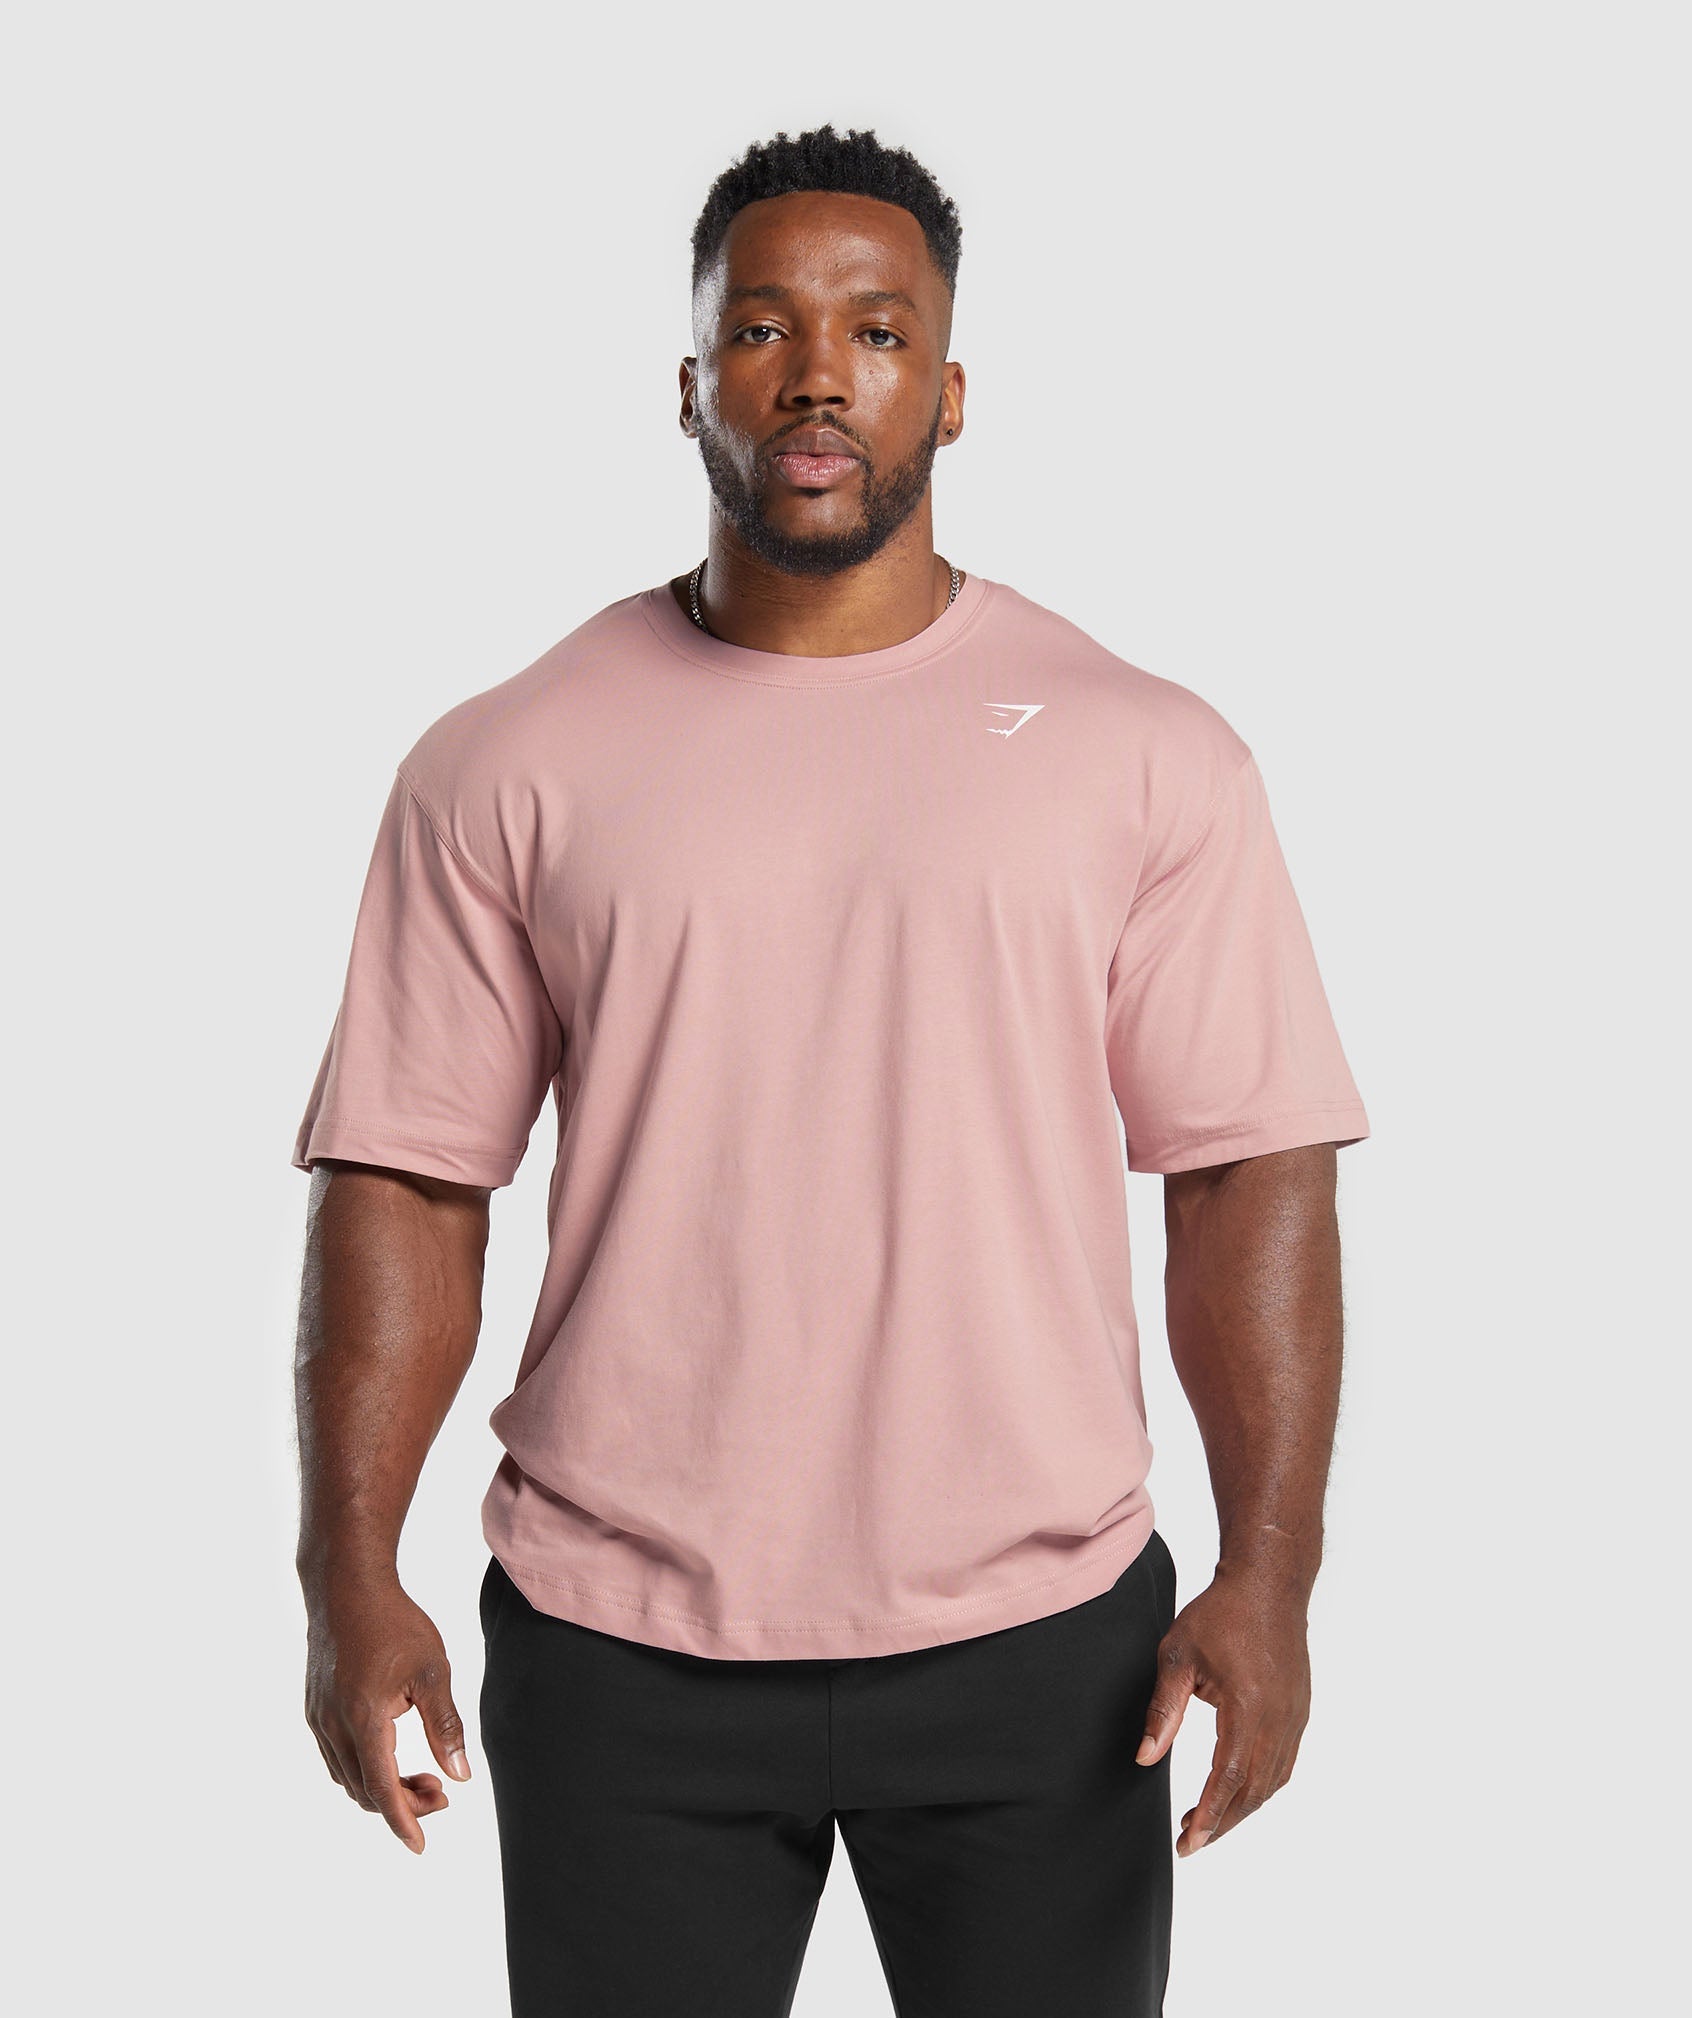 Power T-Shirt in Light Pink - view 2